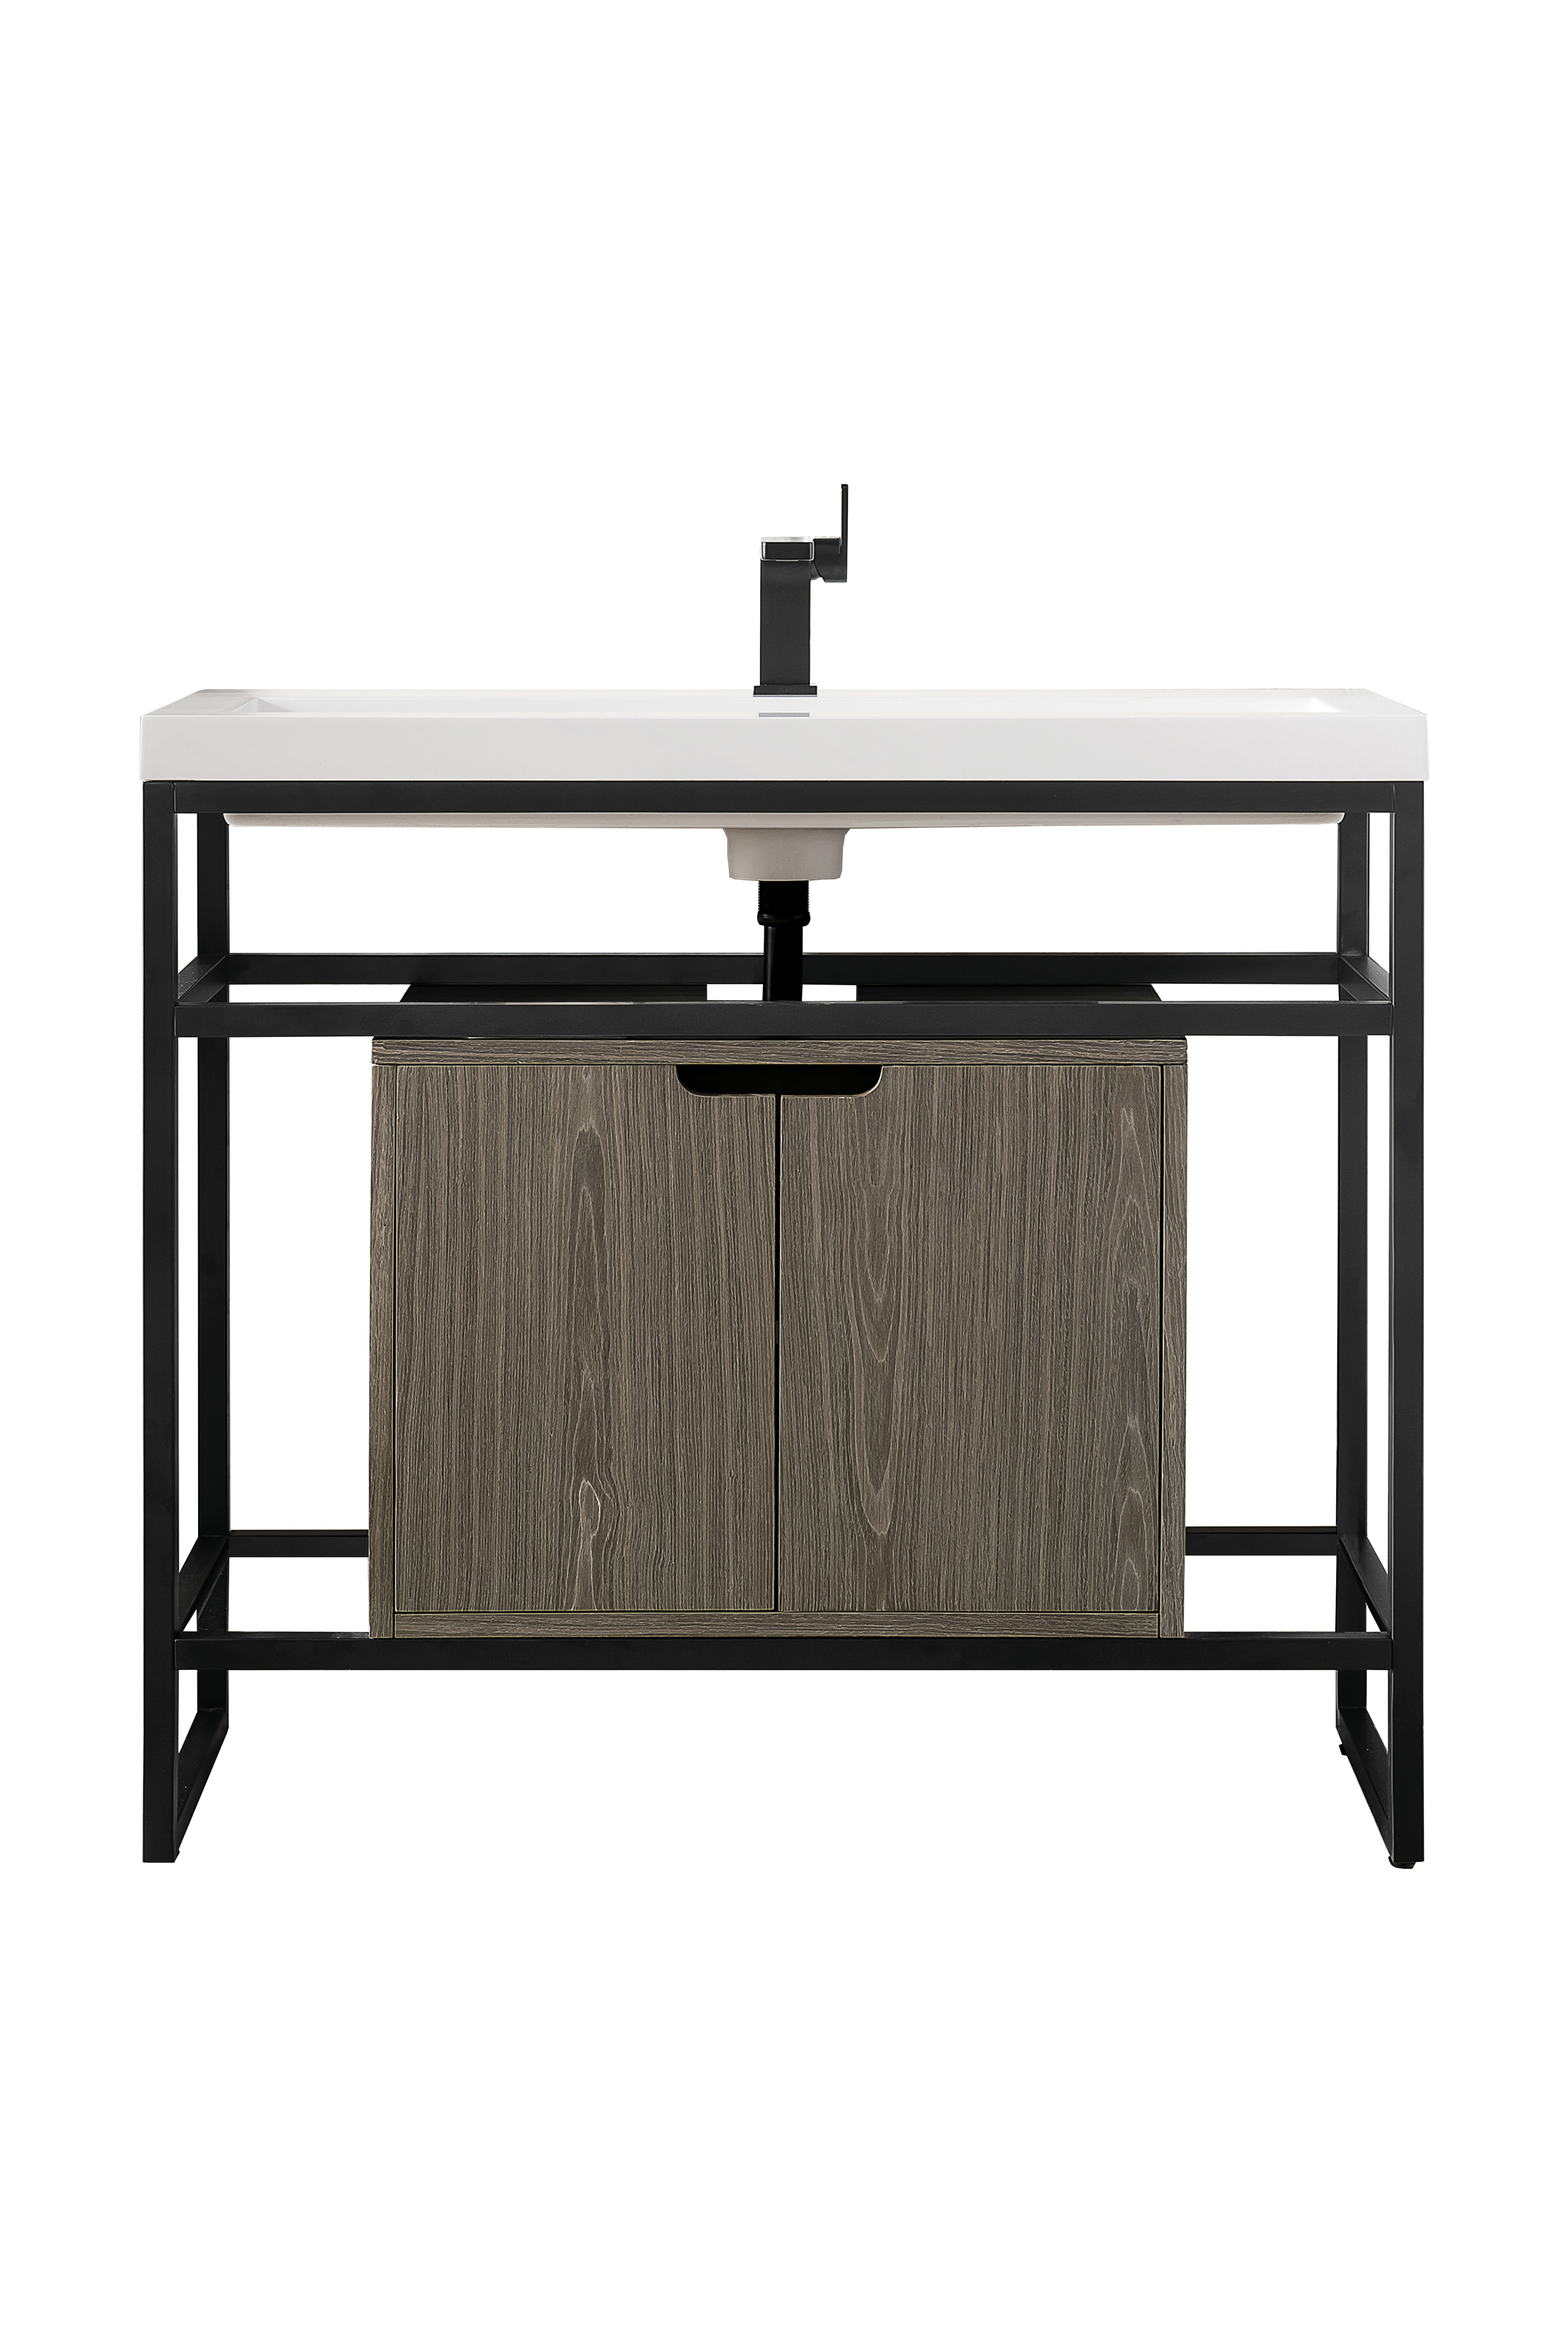 James Martin C105V39.5MBKSCAGRWG Boston 39.5" Stainless Steel Sink Console, Matte Black w/ Ash Gray Storage Cabinet, White Glossy Composite Countertop